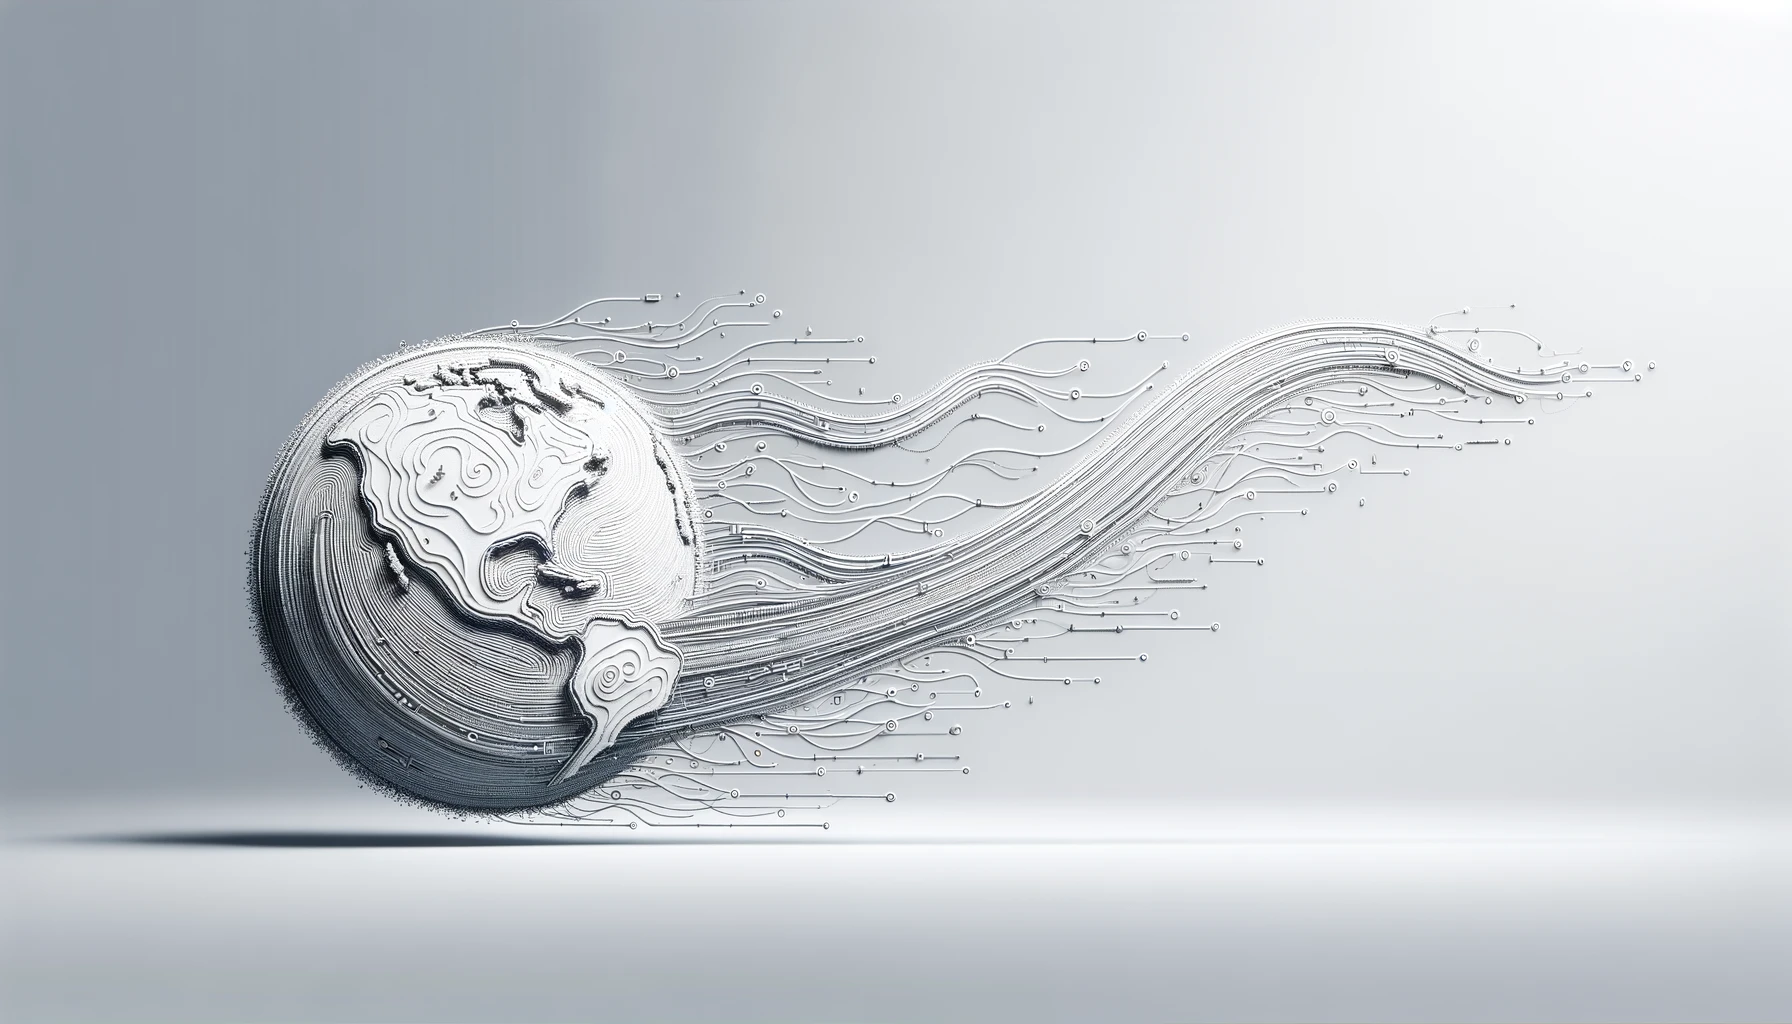 This image shows a stylized, abstract depiction of the world digital wave, consisting of fine lines and dots that create a sense of fluid motion, against a soft gradient background.